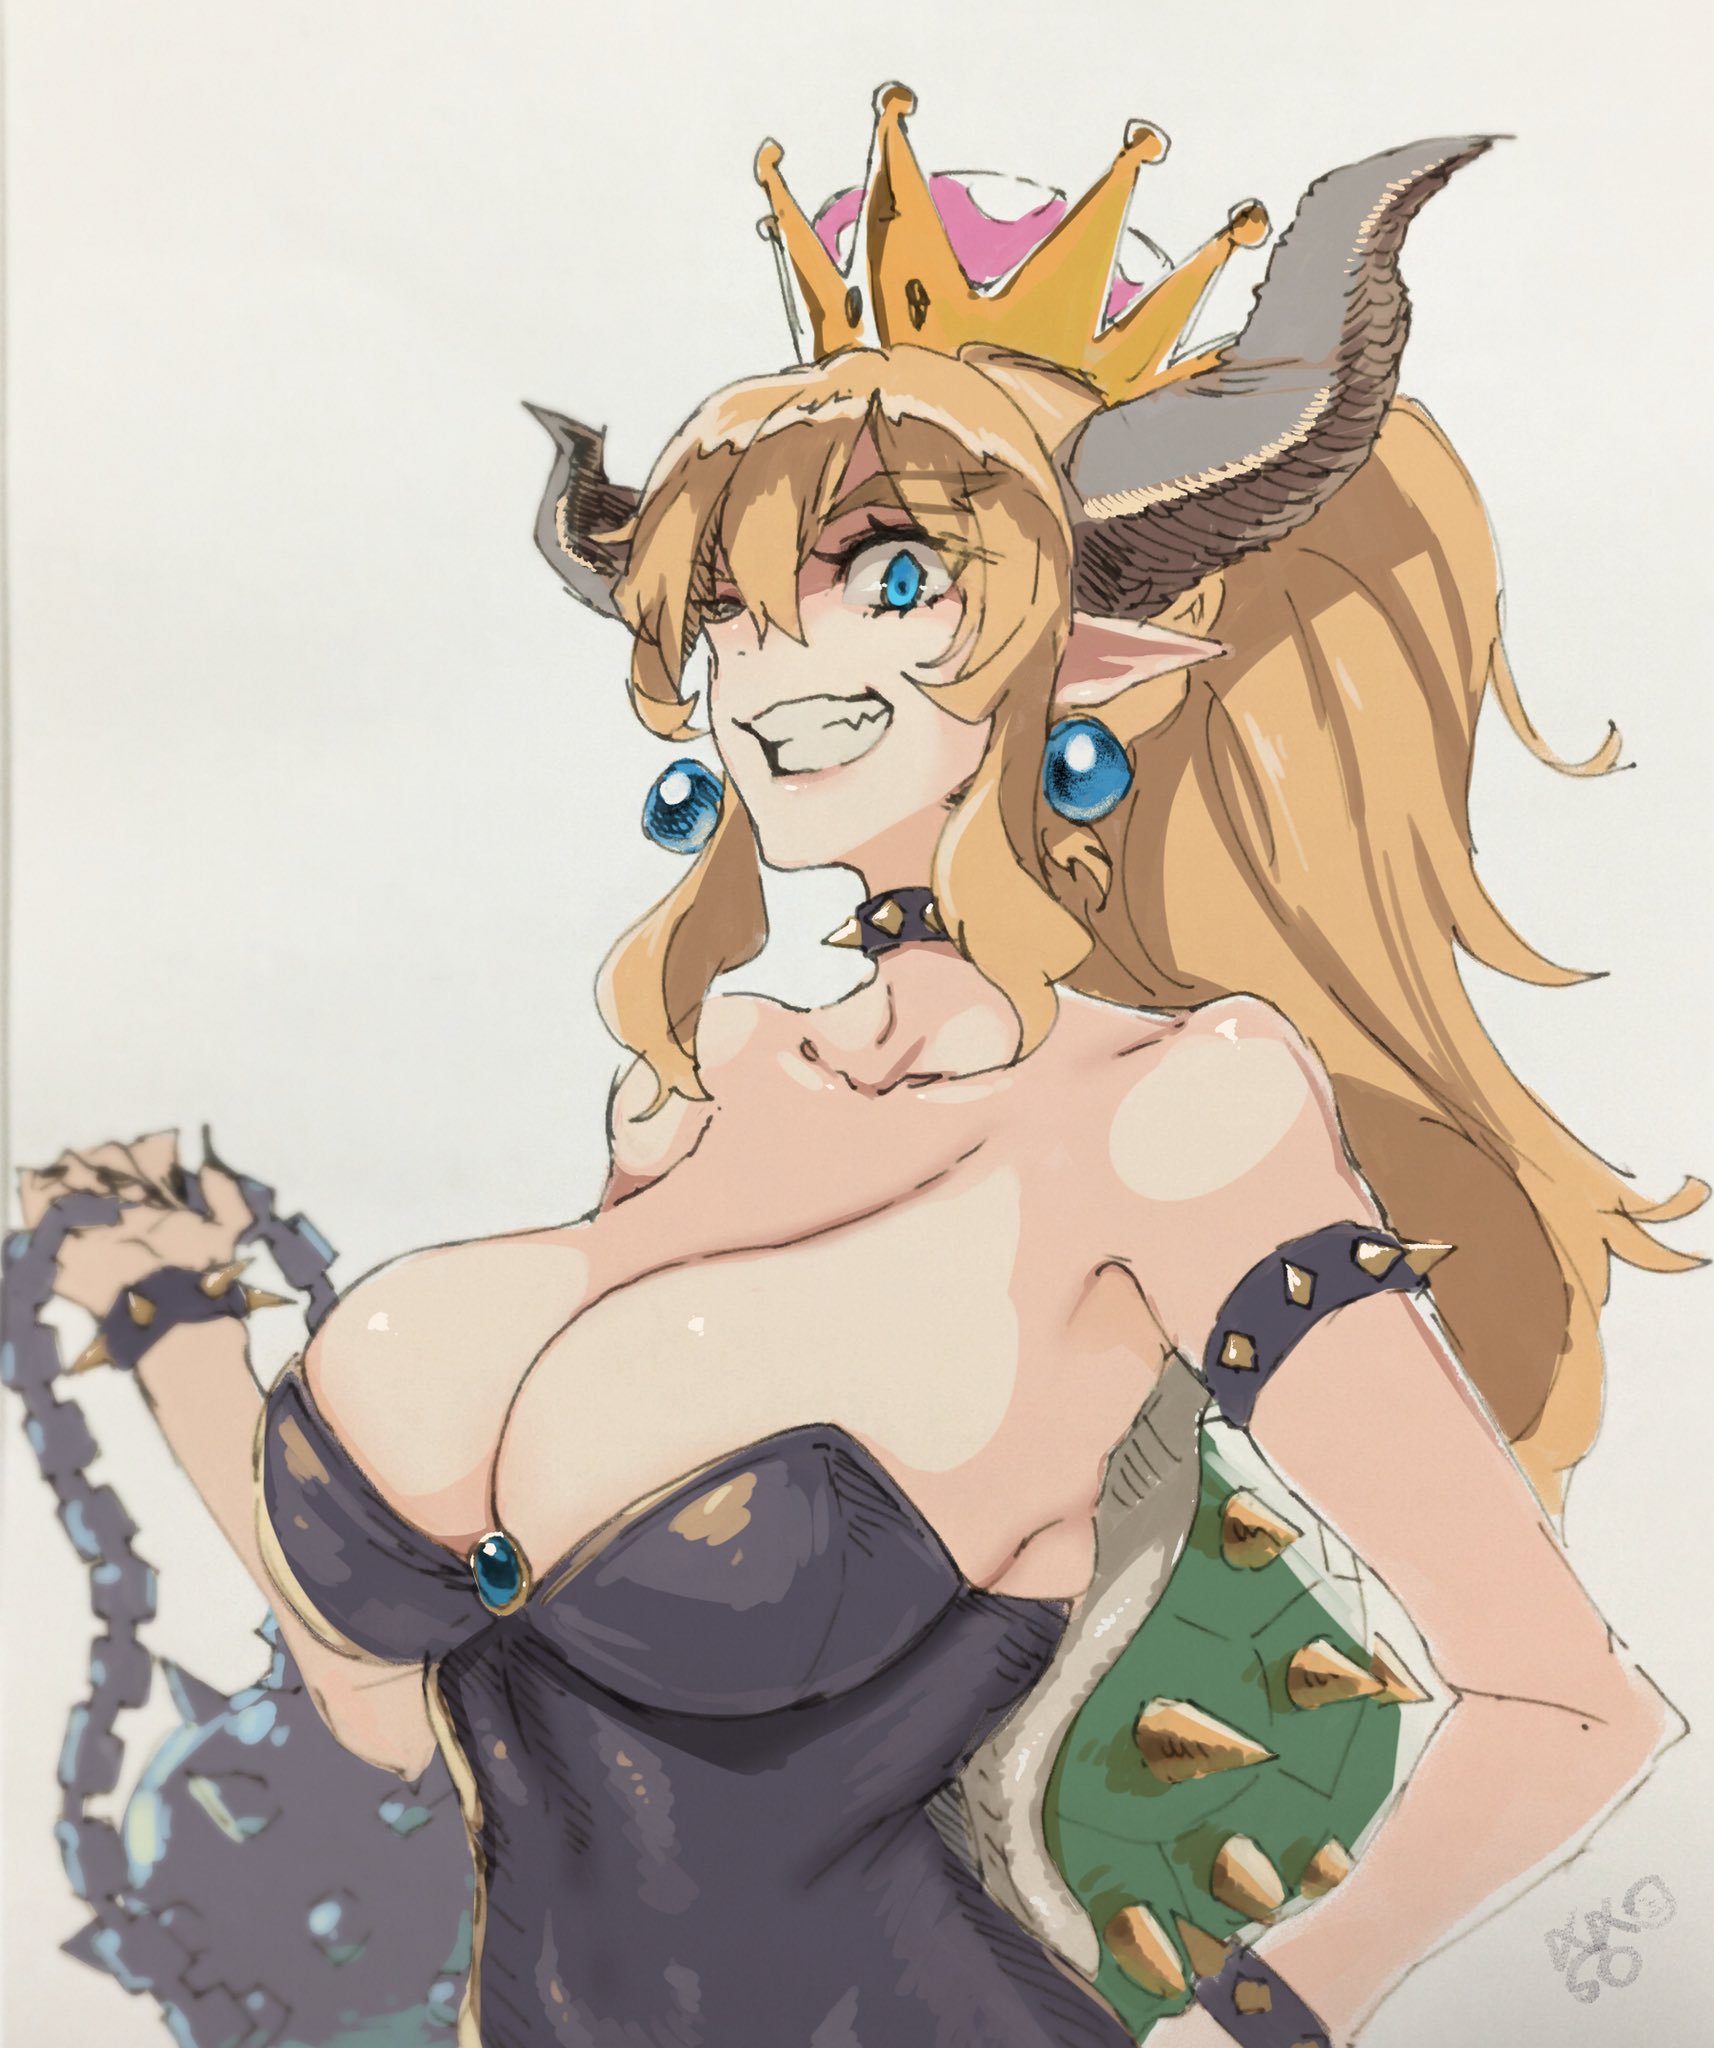 Drawing of Bowsette holding a mace with large breasts